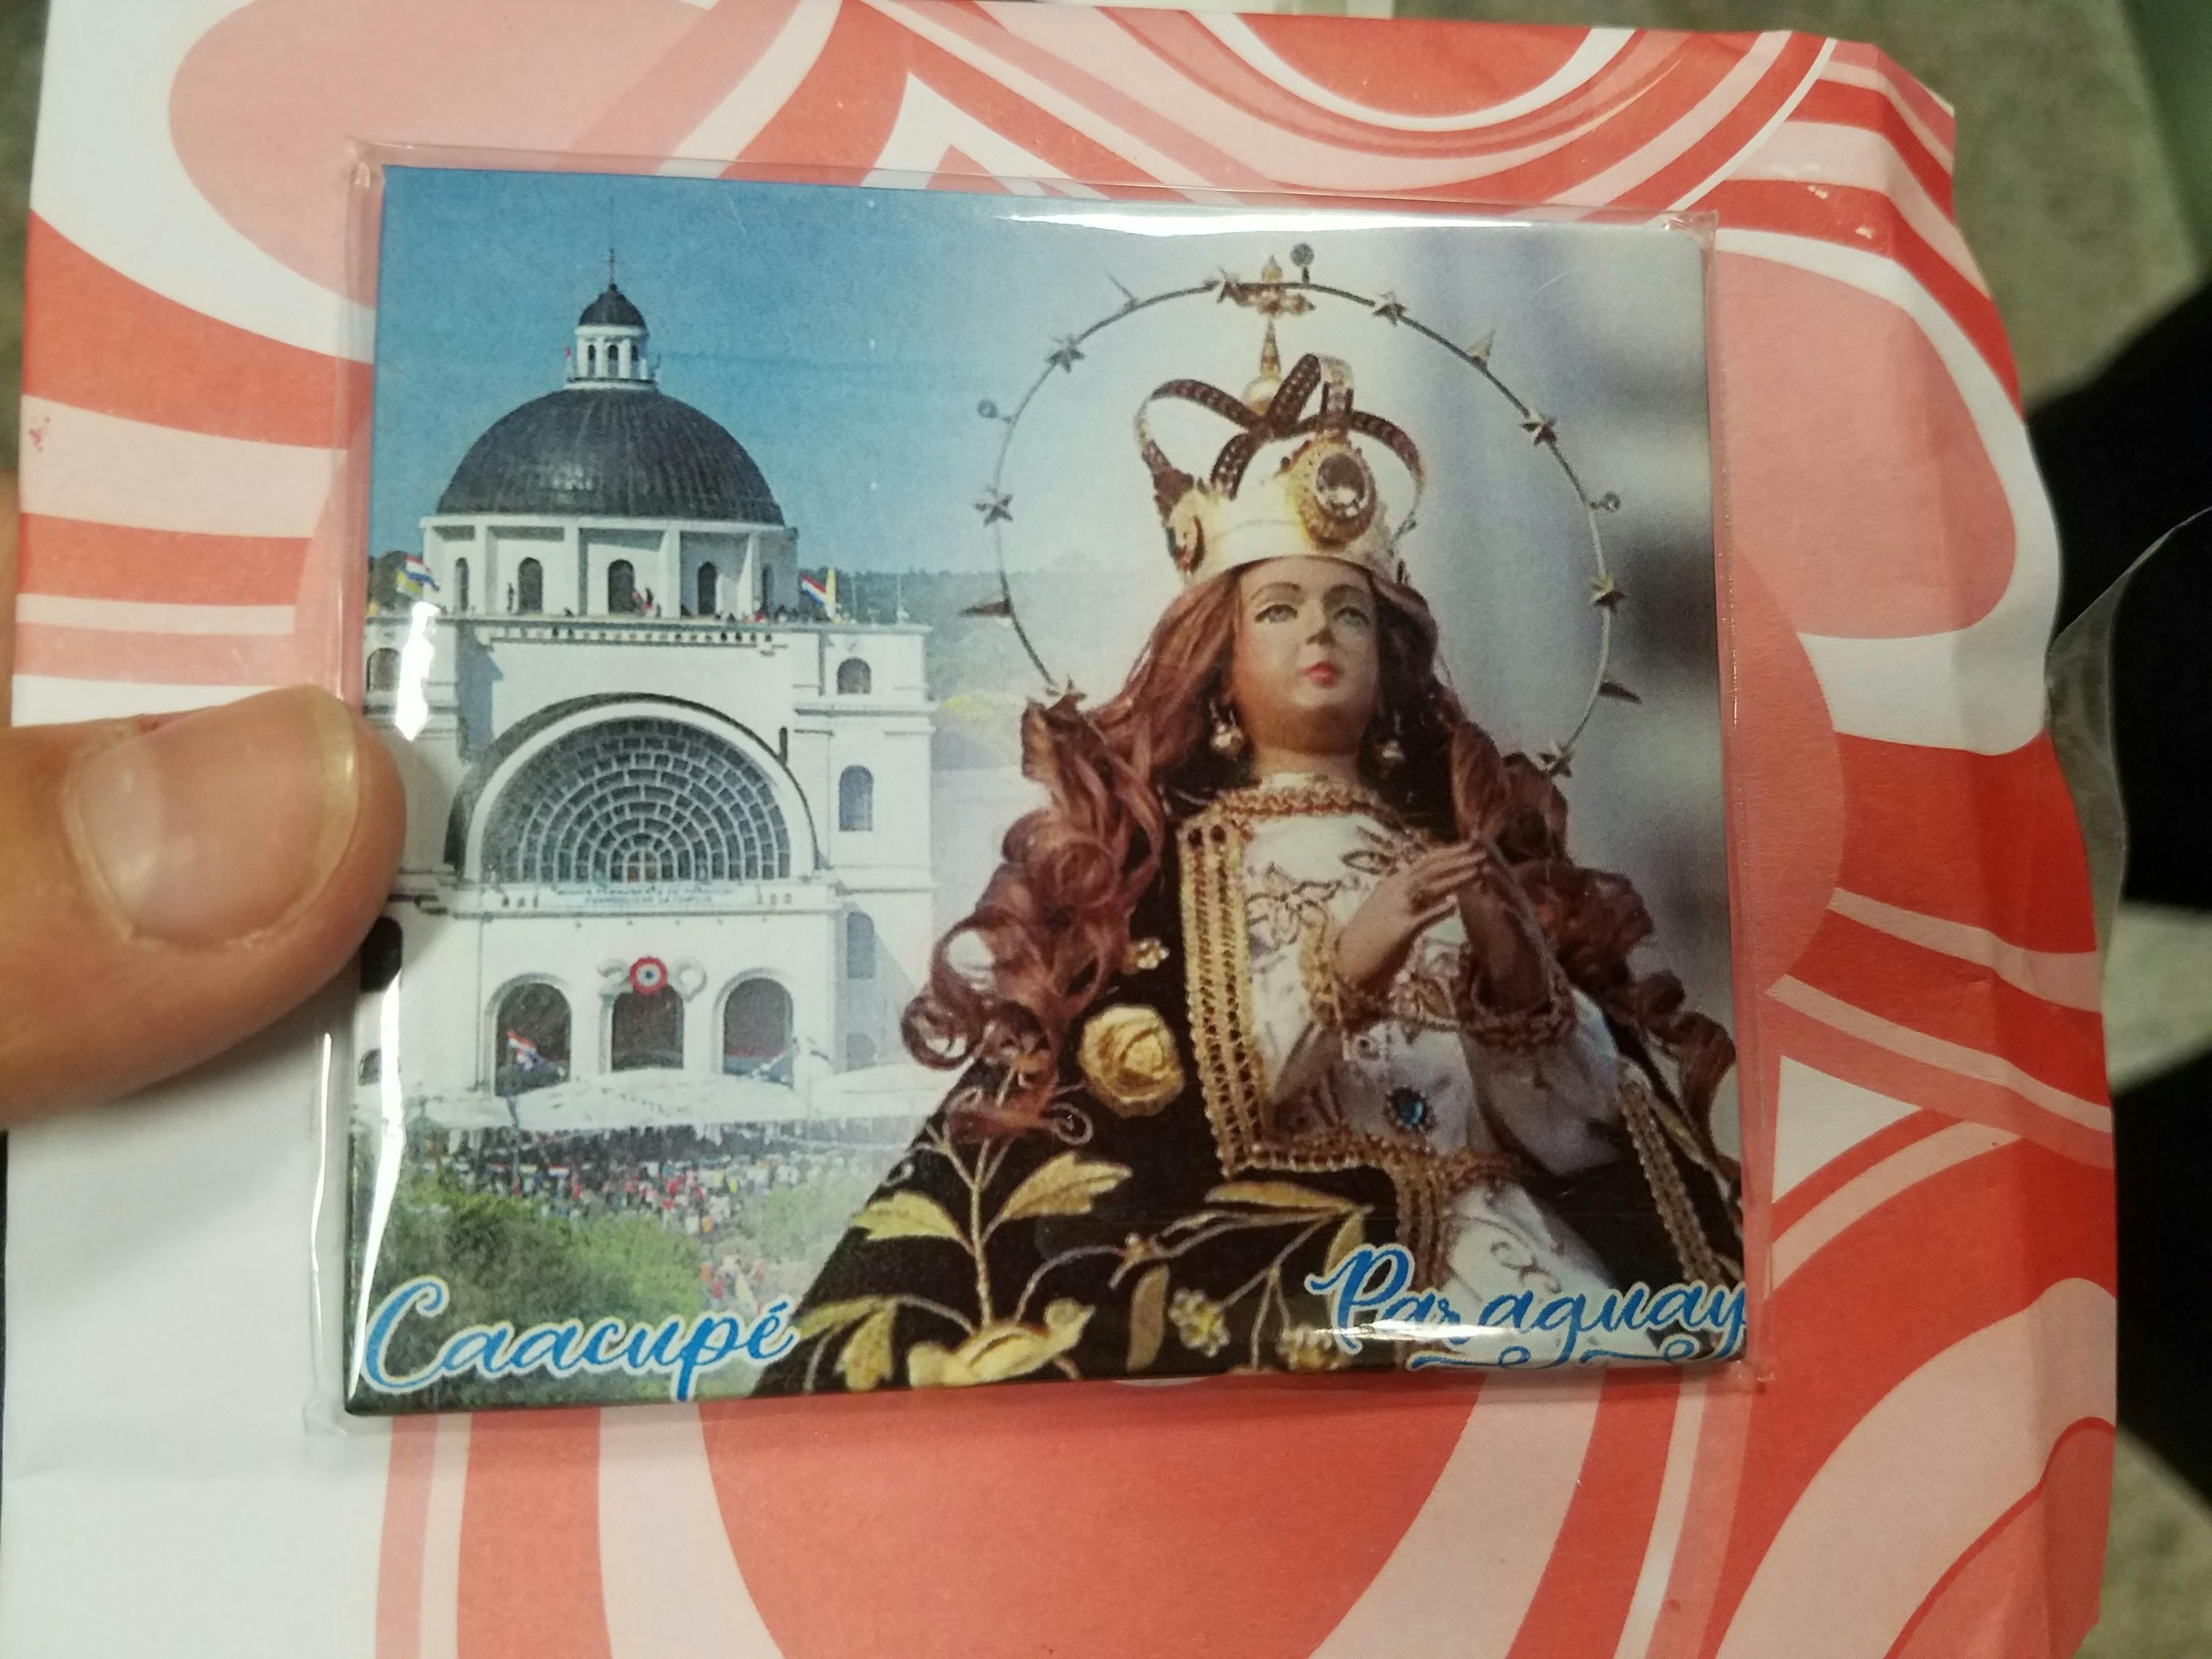 Super cool magnet we got with a good close up of the virgin statue